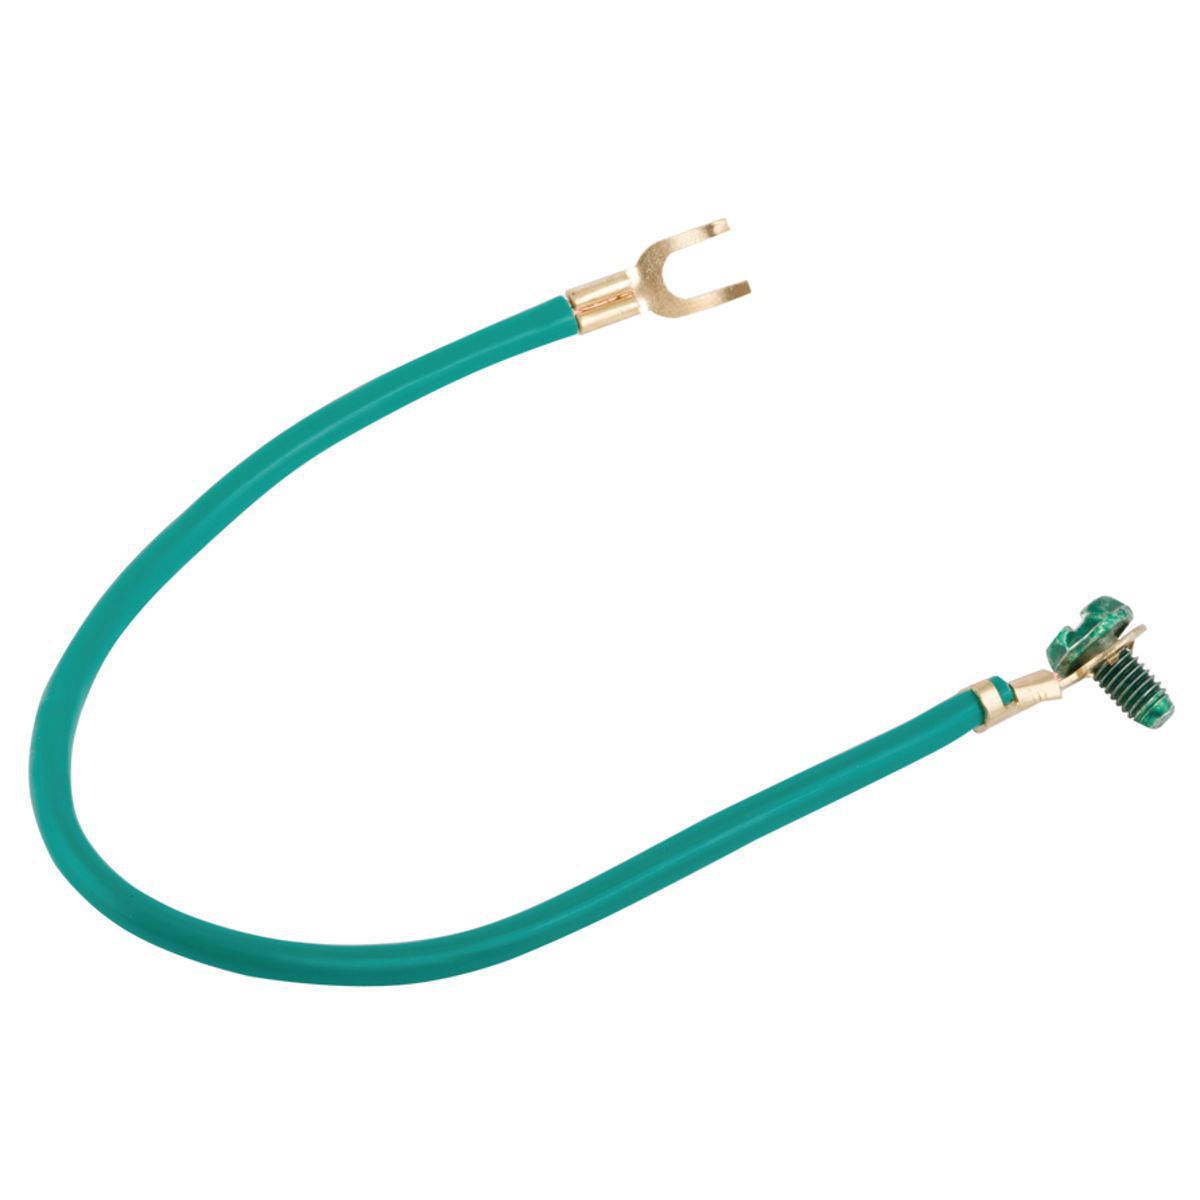 12AWG STR PIGTAIL 8 INCH